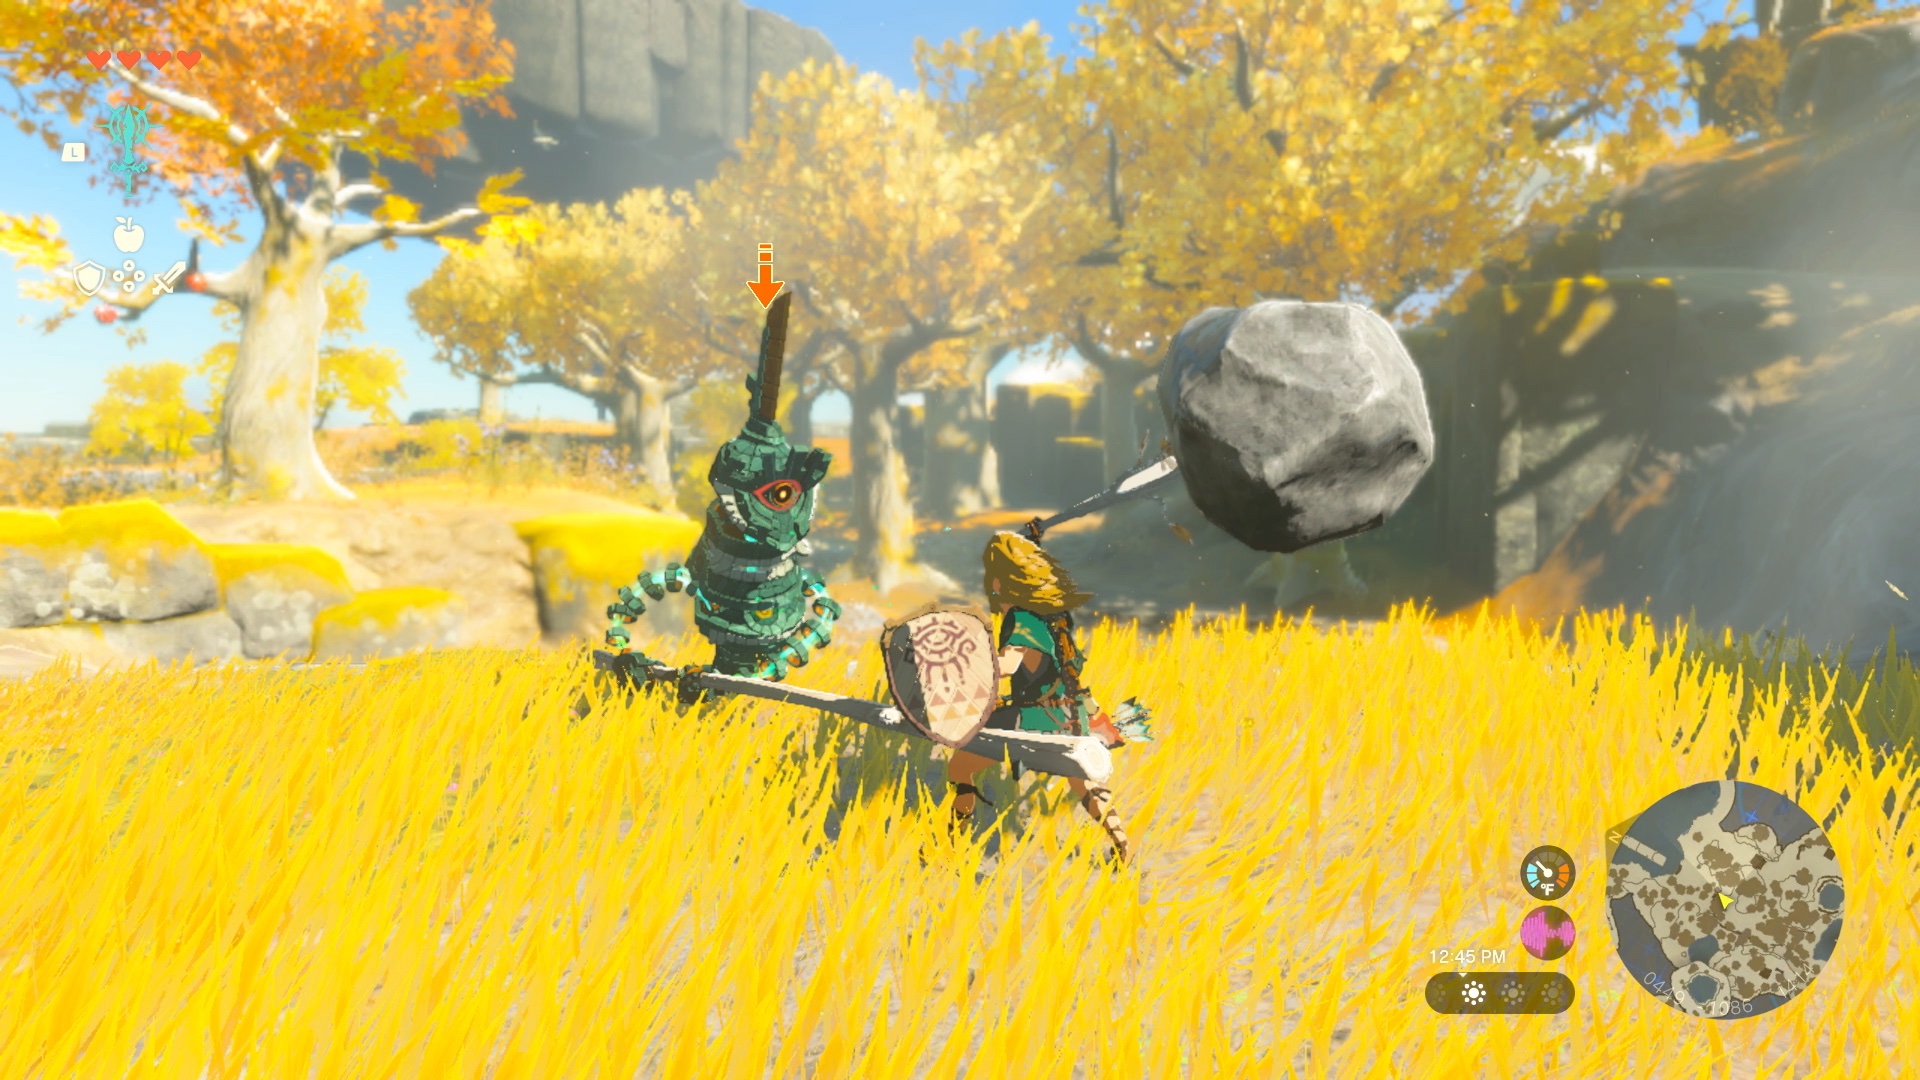 Link strikes a Construct with a makeshift hammer made of a stick and boulder in a screenshot from The Legend of Zelda: Tears of the Kingdom